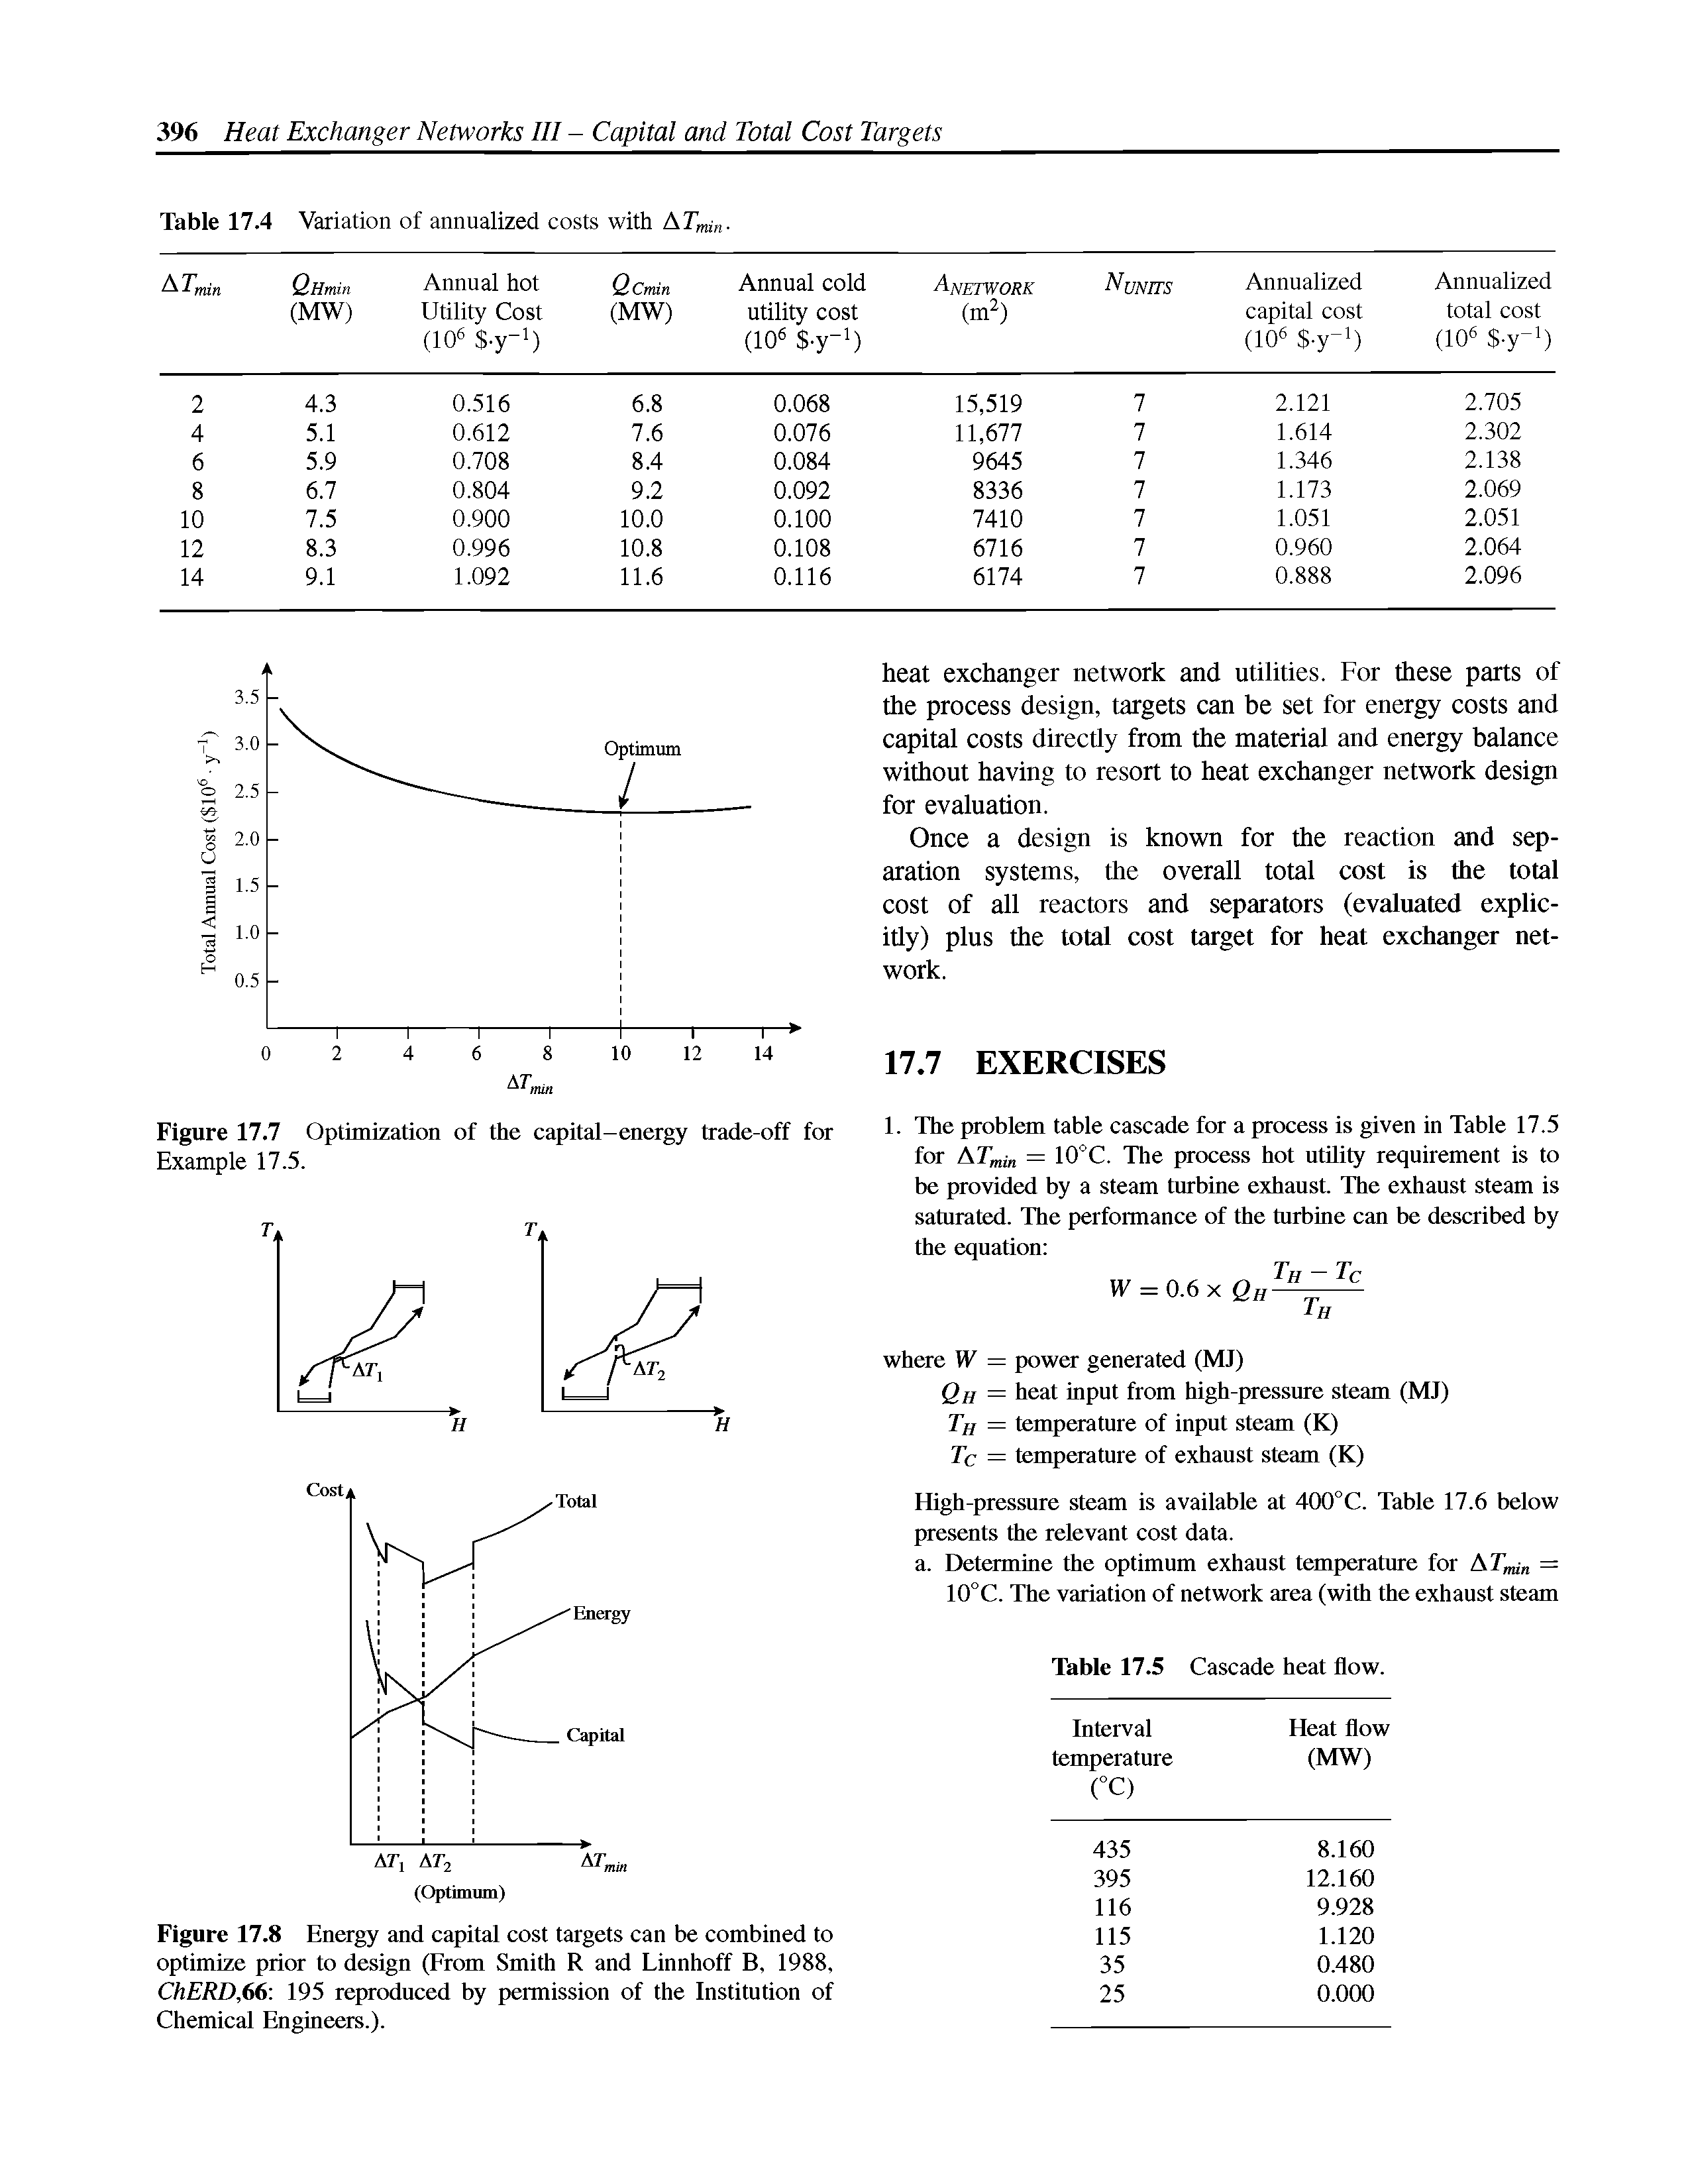 Figure 17.8 Energy and capital cost targets can be combined to optimize prior to design (From Smith R and Linnhoff B, 1988, ChERD,66 195 reproduced by permission of the Institution of Chemical Engineers.).